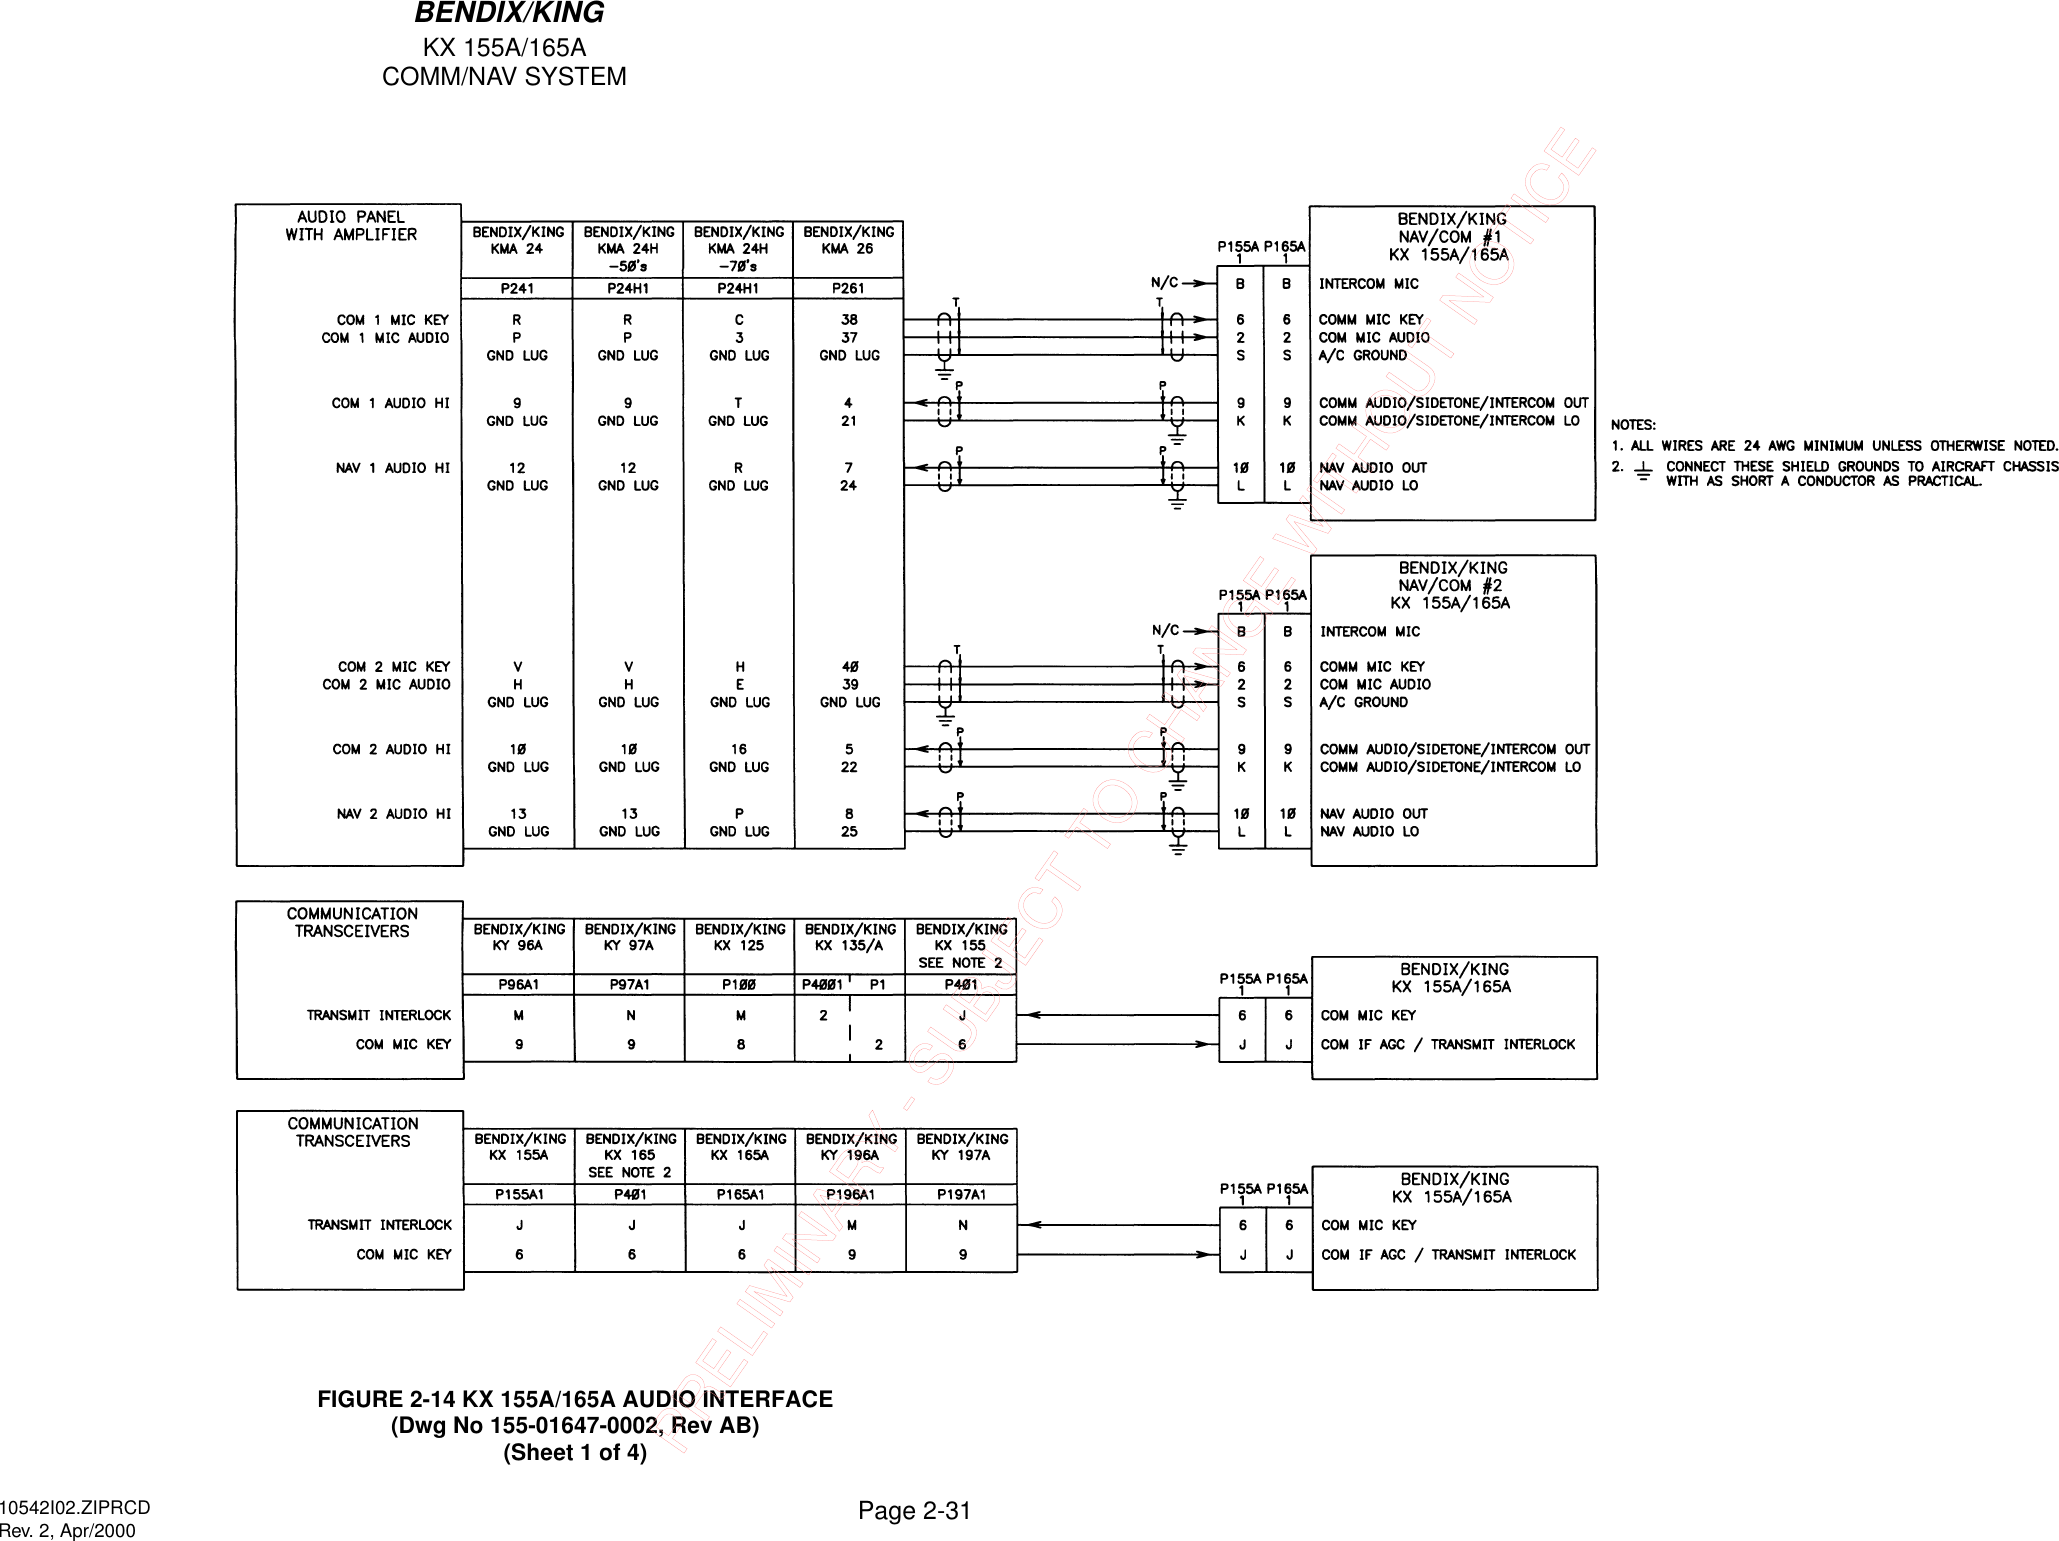 KX 155A/165ACOMM/NAV SYSTEMPage 2-31BENDIX/KING10542I02.ZIPRCDRev. 2, Apr/2000FIGURE 2-14 KX 155A/165A AUDIO INTERFACE(Dwg No 155-01647-0002, Rev AB)(Sheet 1 of 4)PRELIMINARY - SUBJECT TO CHANGE WITHOUT NOTICE